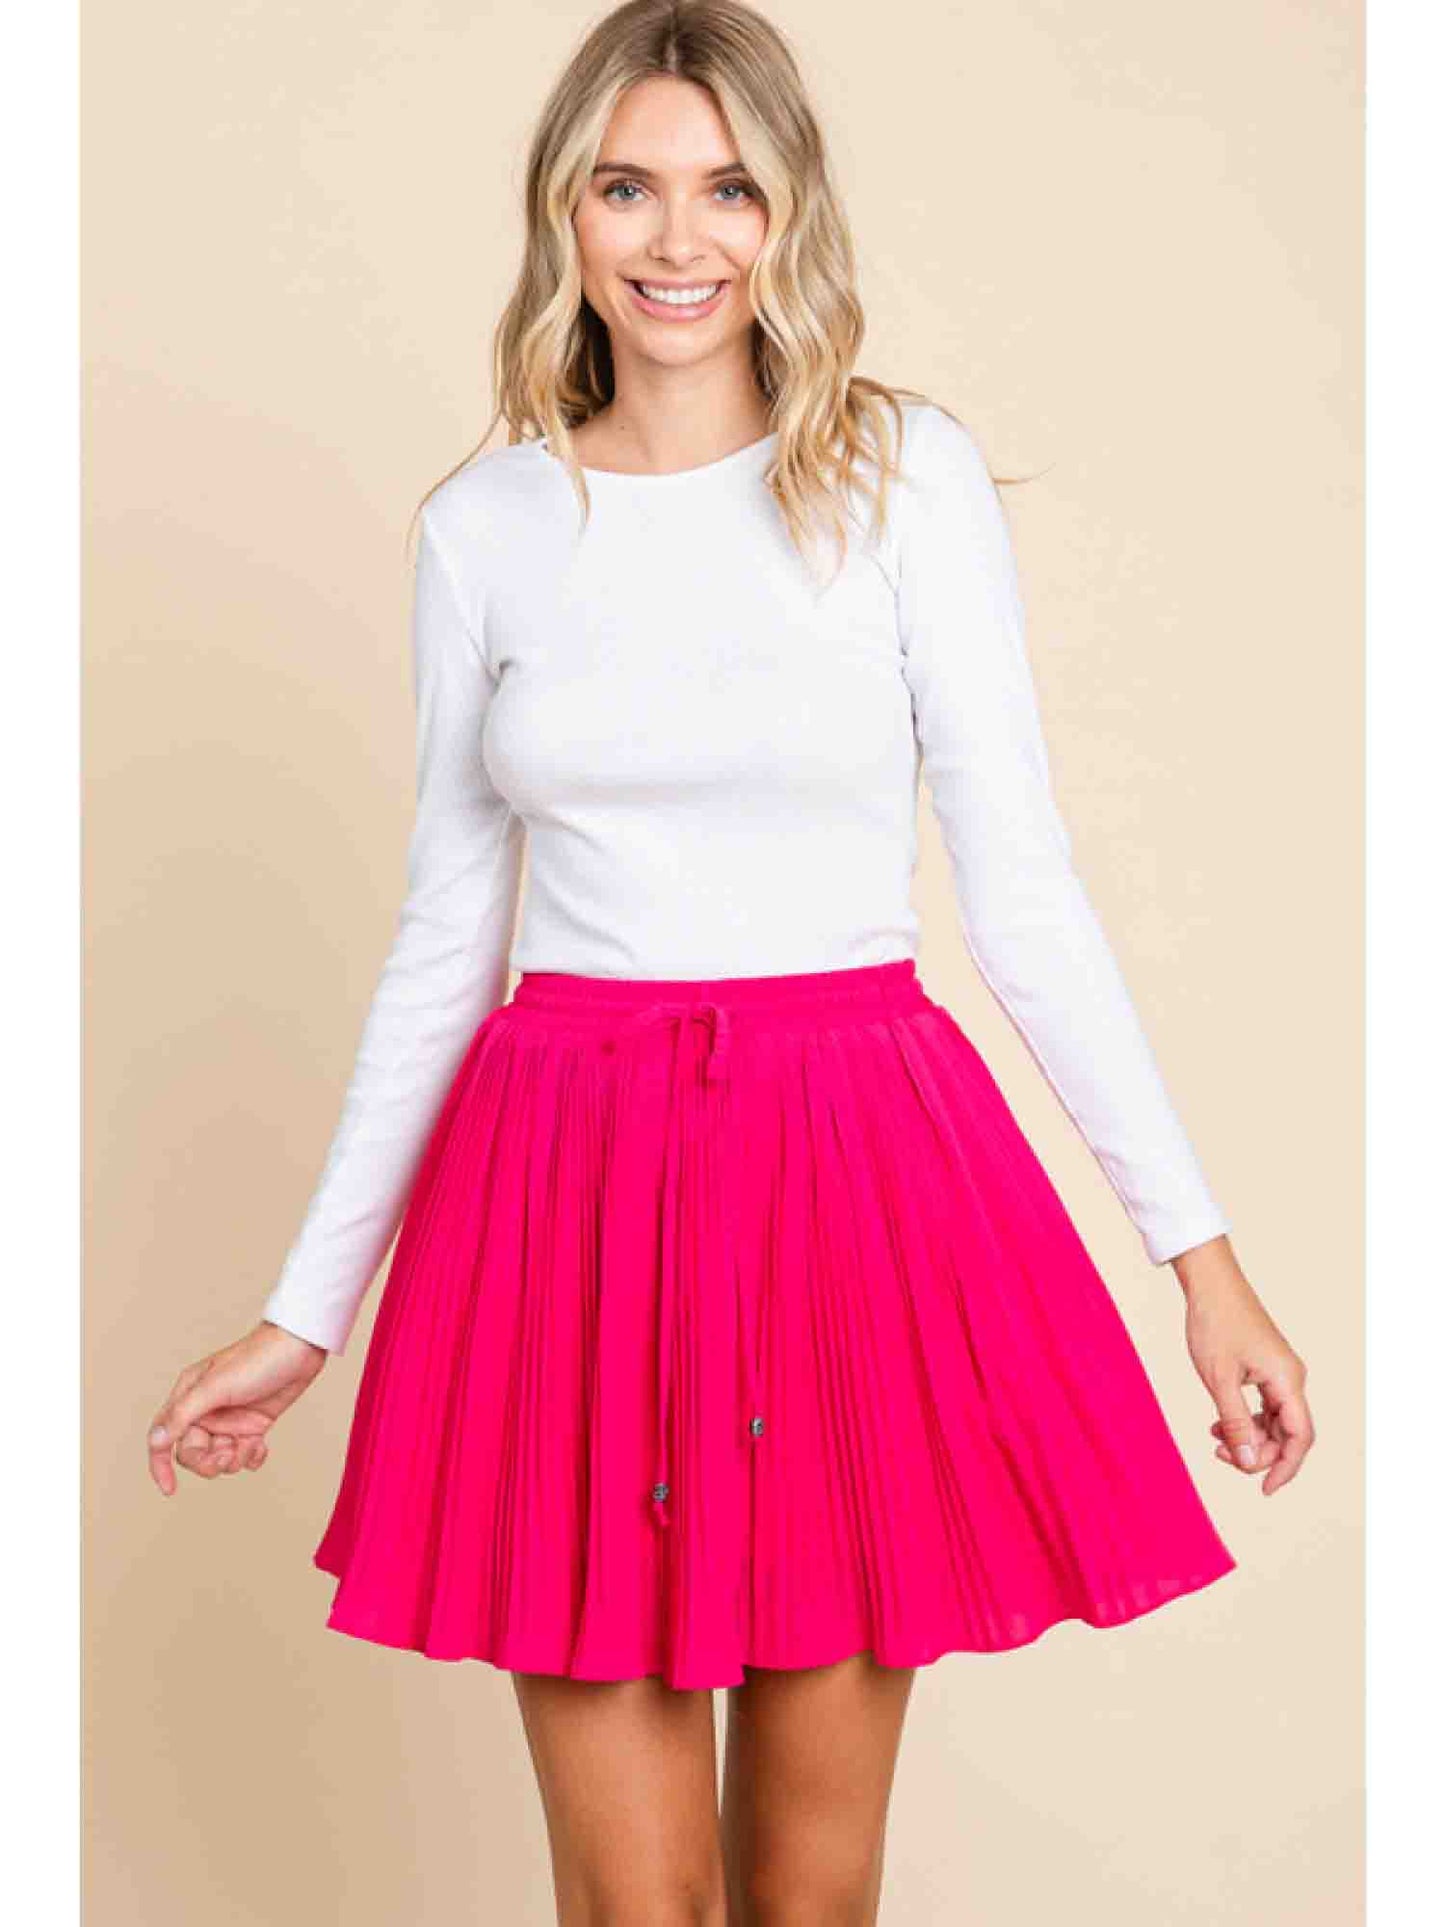 Solid Pleated Skirt in Hot Pink by Jodifl